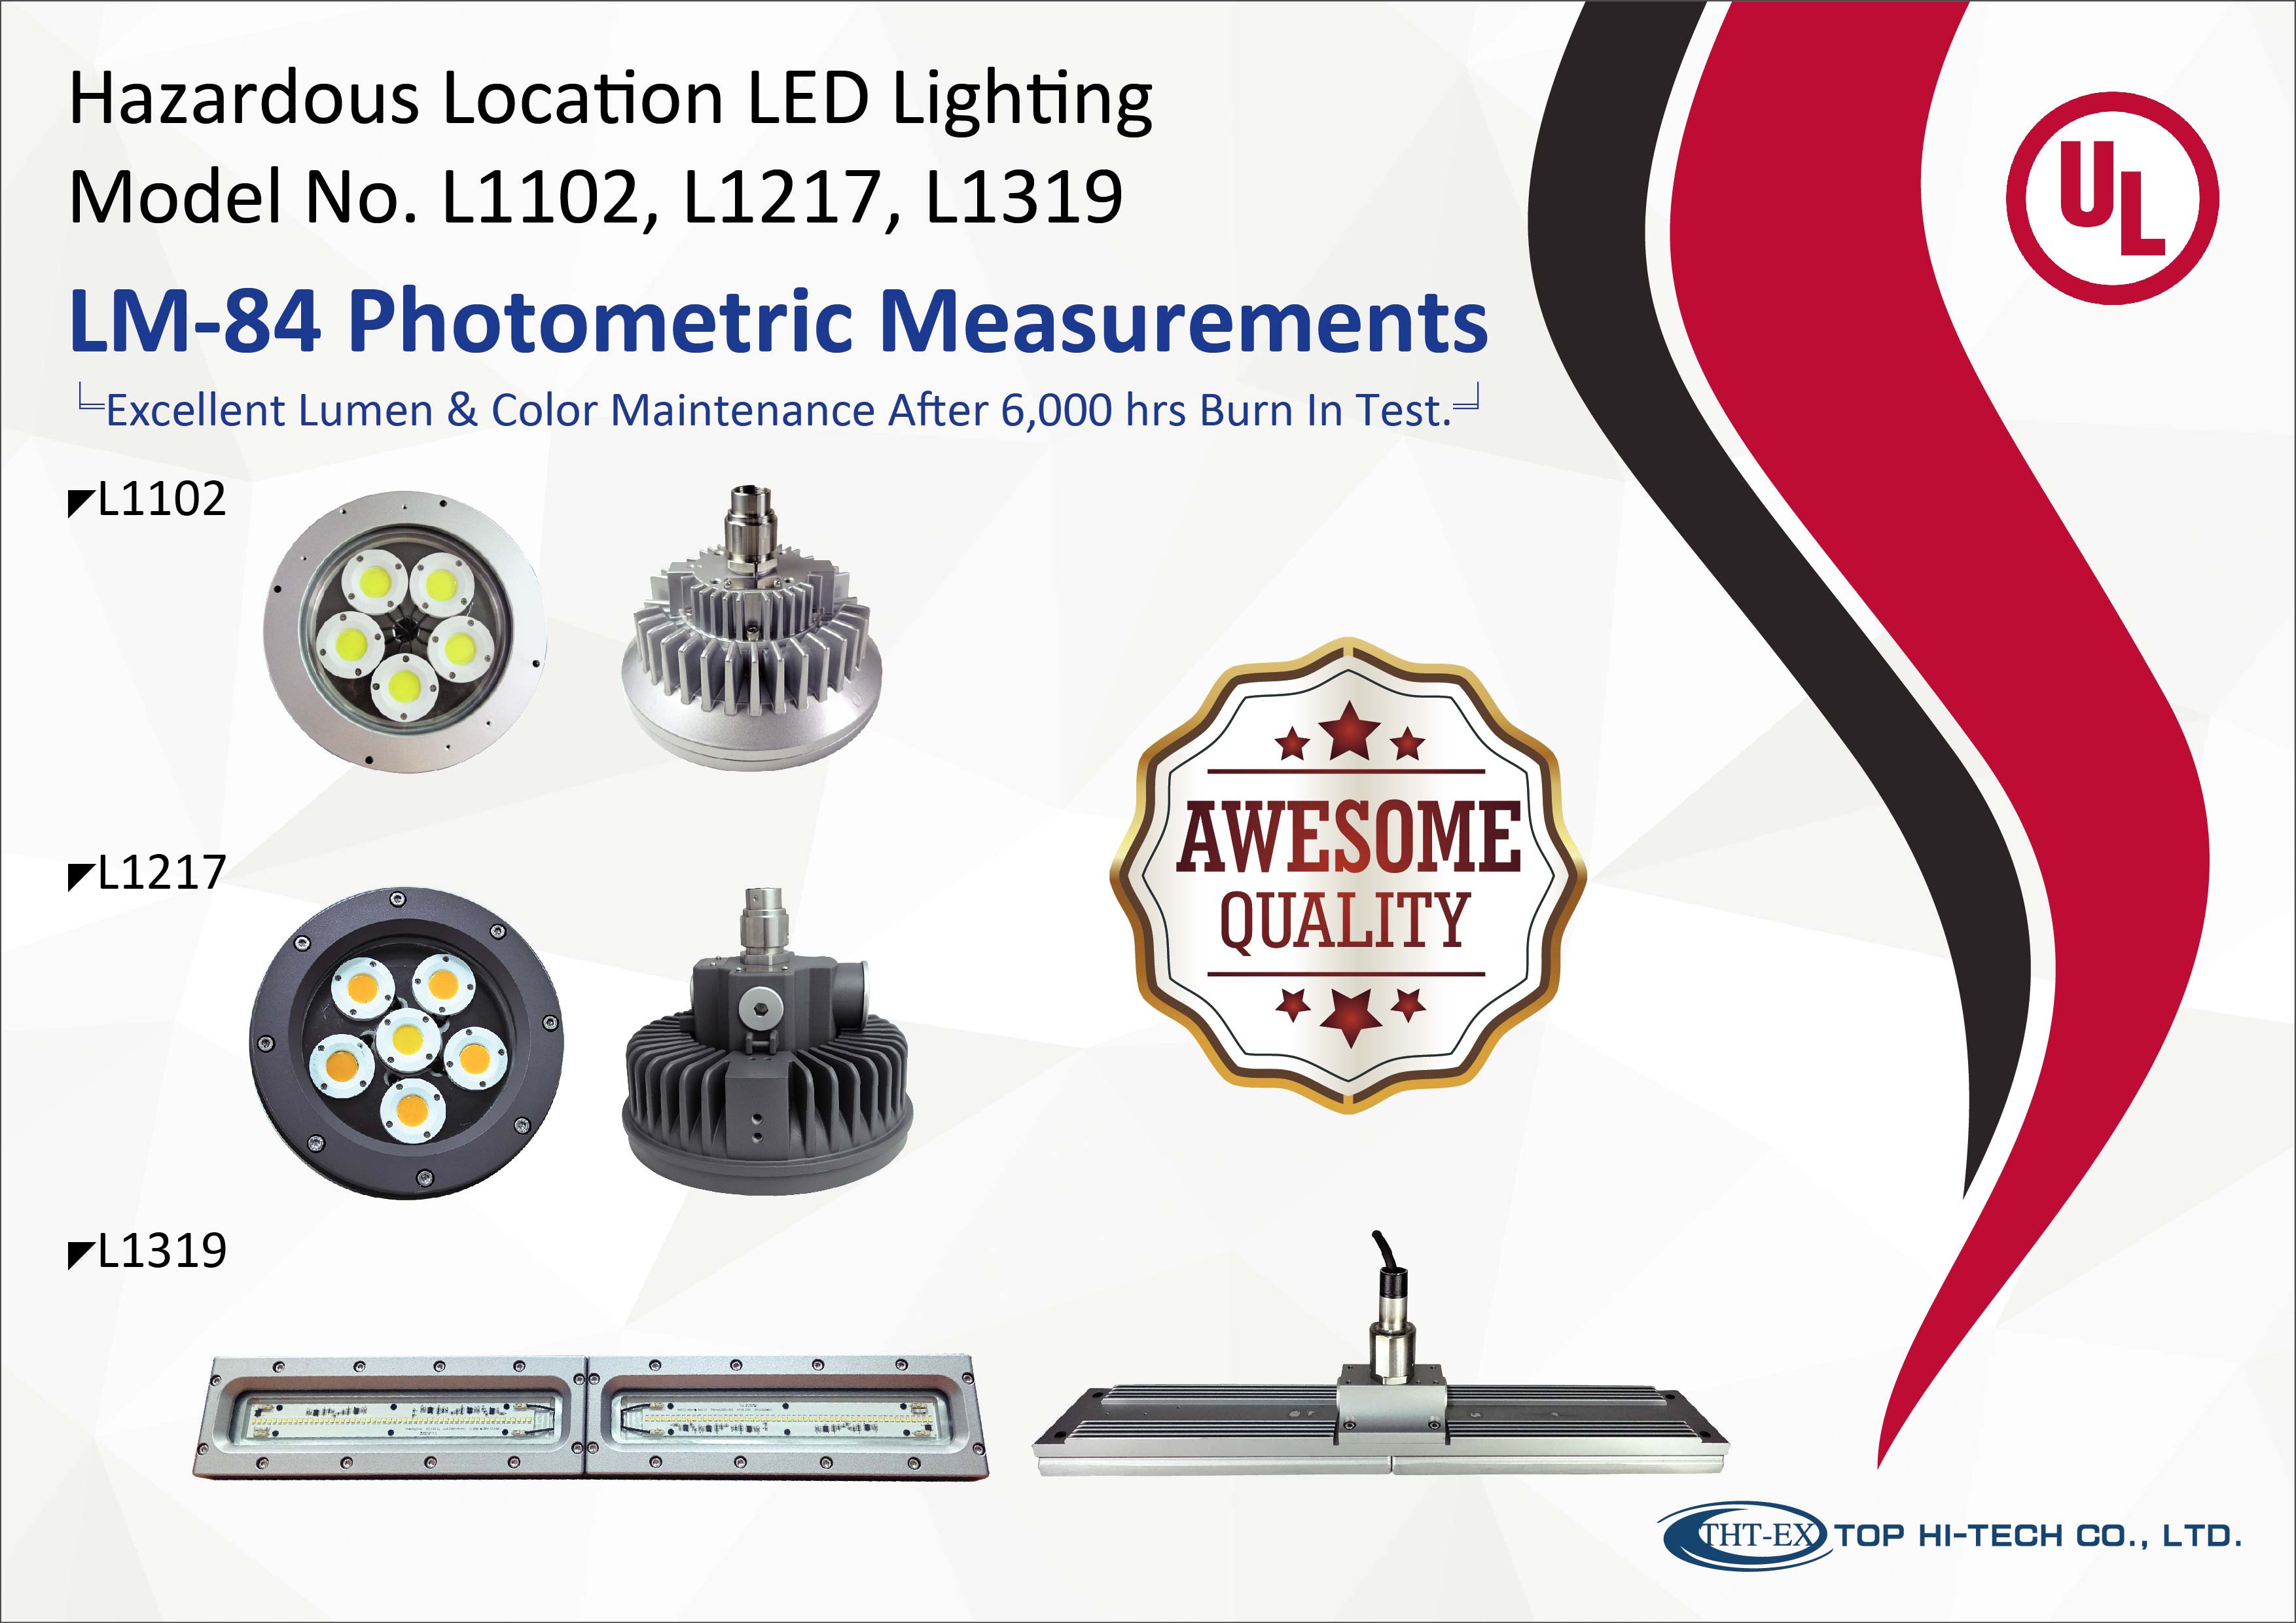 THT-EX Explosion-proof AC-IN LED Lights Received Outstanding LM-84 Testing Result!